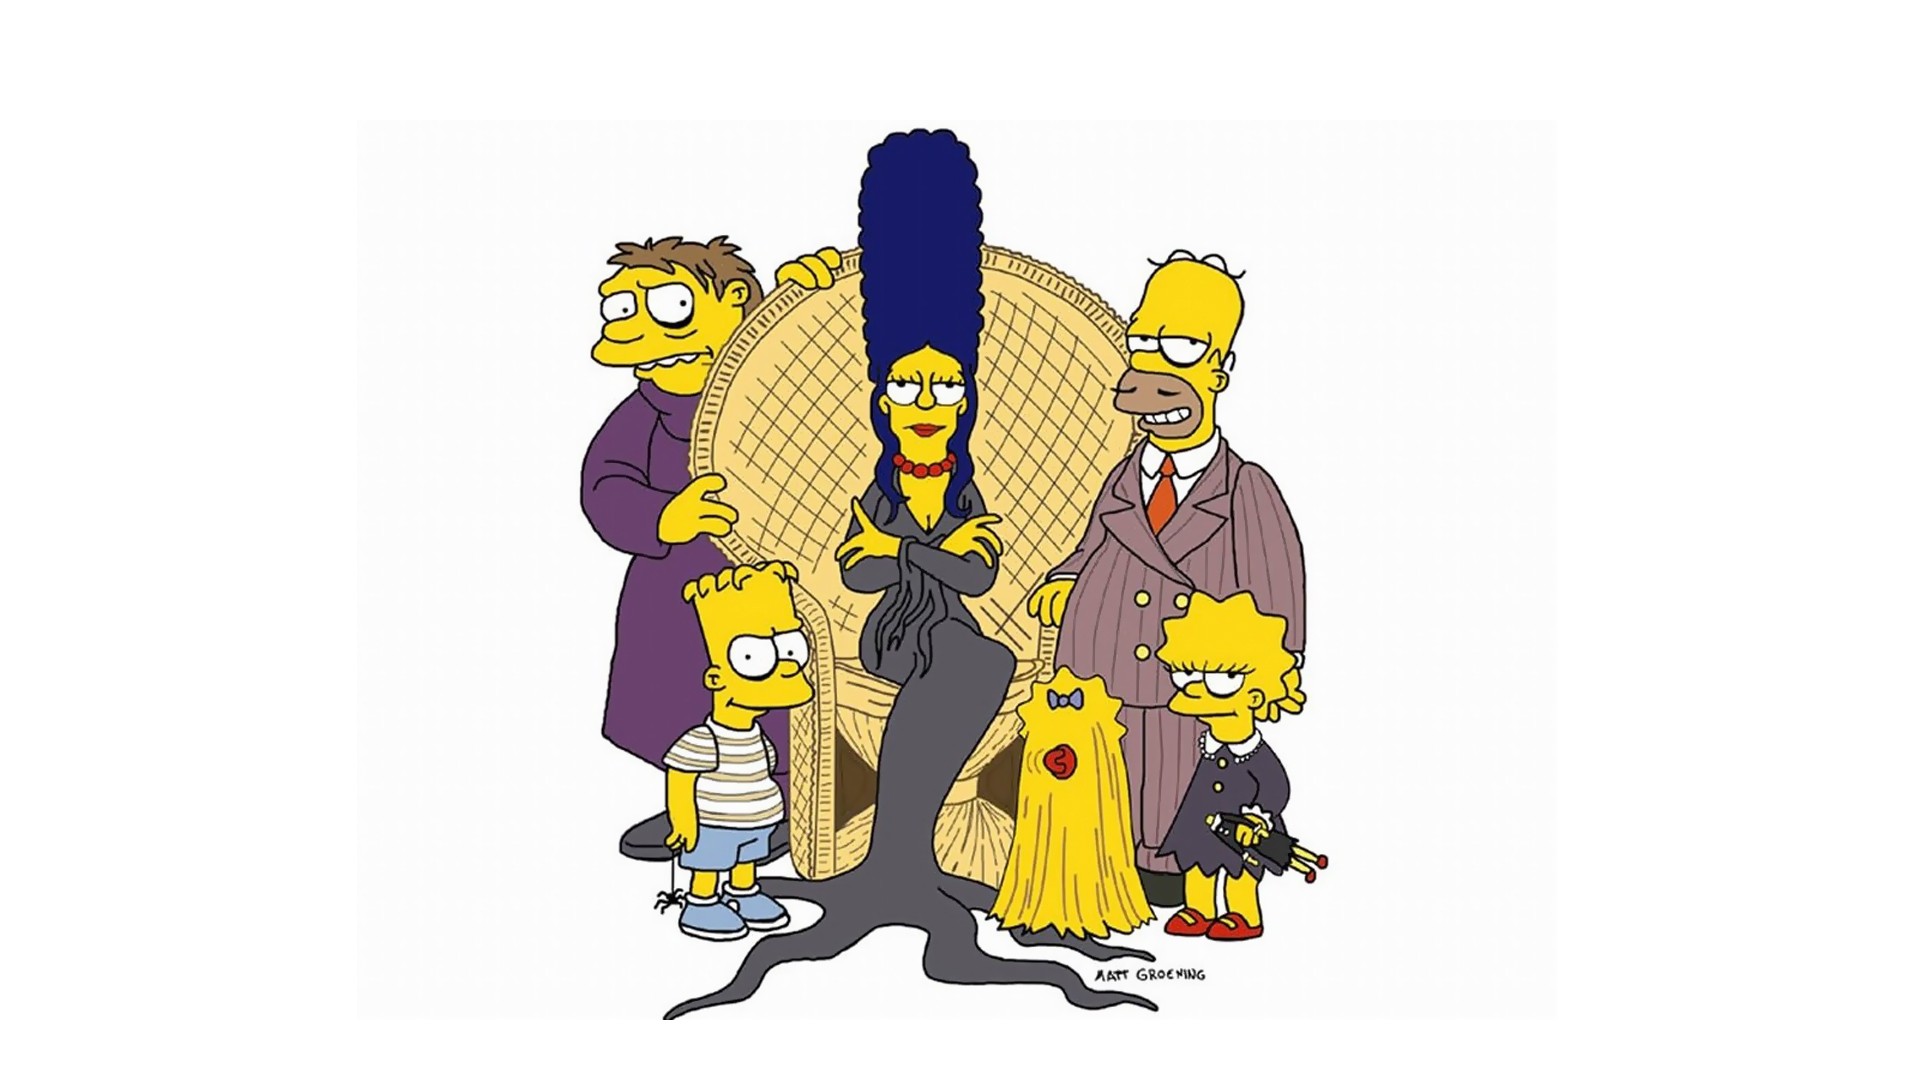 The Simpsons Homer Simpson Bart Simpson Marge Simpson Lisa Simpson Maggie Simpson The Addams Family  1920x1080